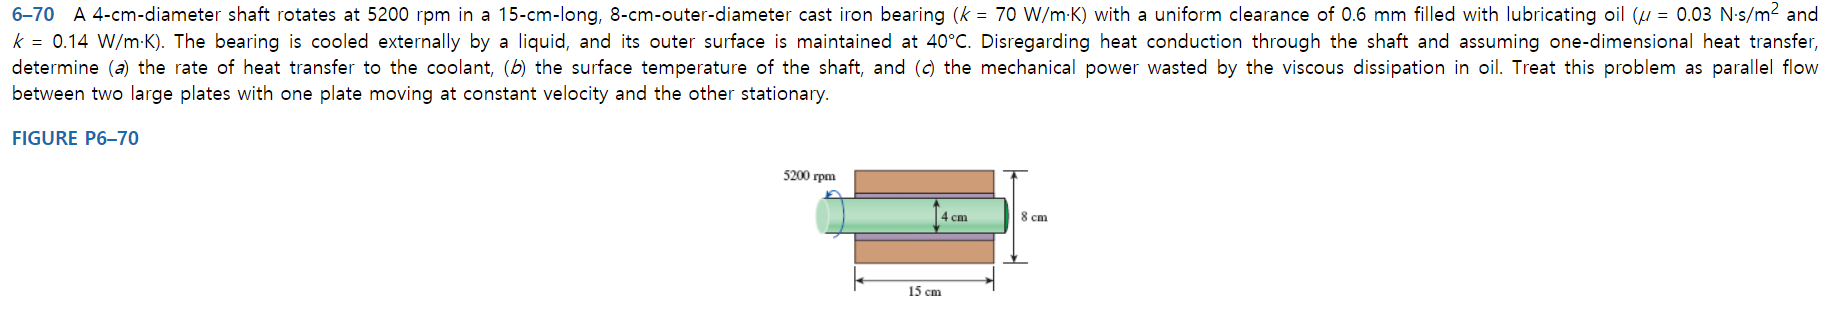 6-70 A 4-cm-diameter shaft rotates at 5200 rpm in a 15-cm-long, 8-cm-outer-diameter cast iron bearing (k 70 W/m-K) with a uniform clearance of 0.6 mm filled with lubricating oil (u 0.03 N-s/m2 and
k = 0.14 W/m K). The bearing is cooled externally by a liquid, and its outer surface is maintained at 40°C. Disregarding heat conduction through the shaft and assuming one-dimensional heat transfer,
determine (a) the rate of heat transfer to the coolant, (b) the surface temperature of the shaft, and (c) the mechanical power wasted by the viscous dissipation in oil. Treat this problem as parallel flow
between two large plates with one plate moving at constant velocity and the other stationary.
FIGURE P6-70
5200 rpm
4 cm
8 cm
15 cm
